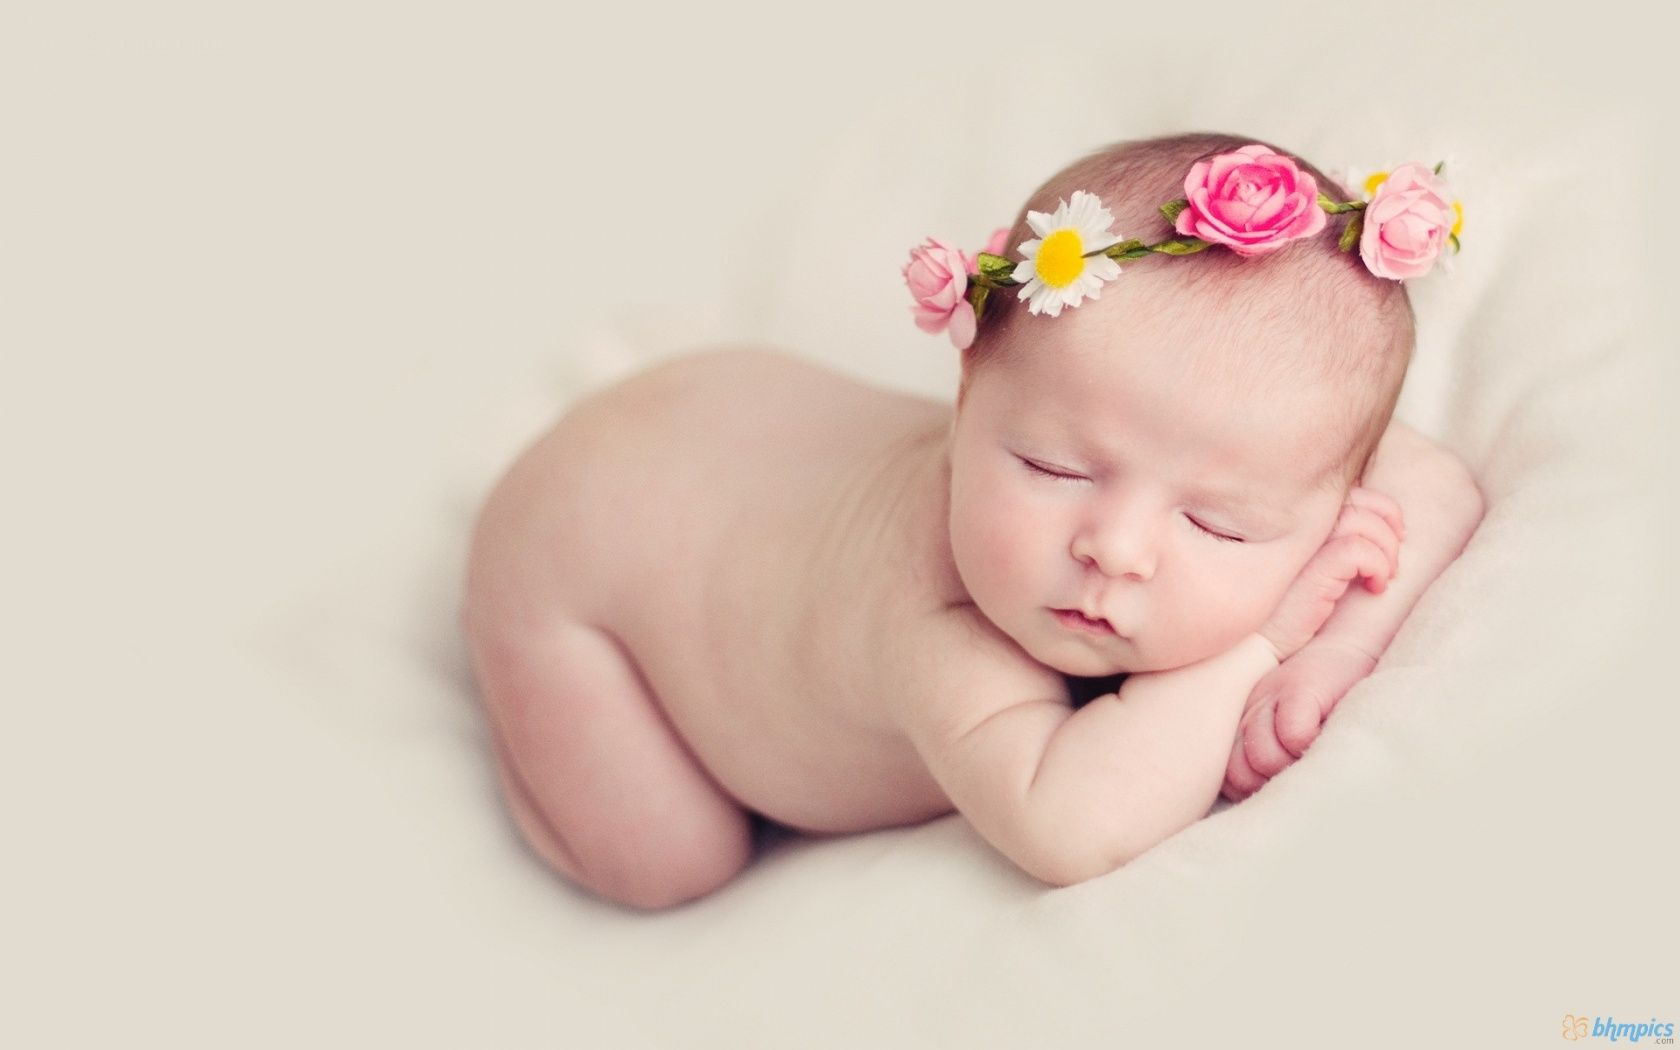 Download Cute Baby Photos Wallpaper For Download And Share. | Baby ...